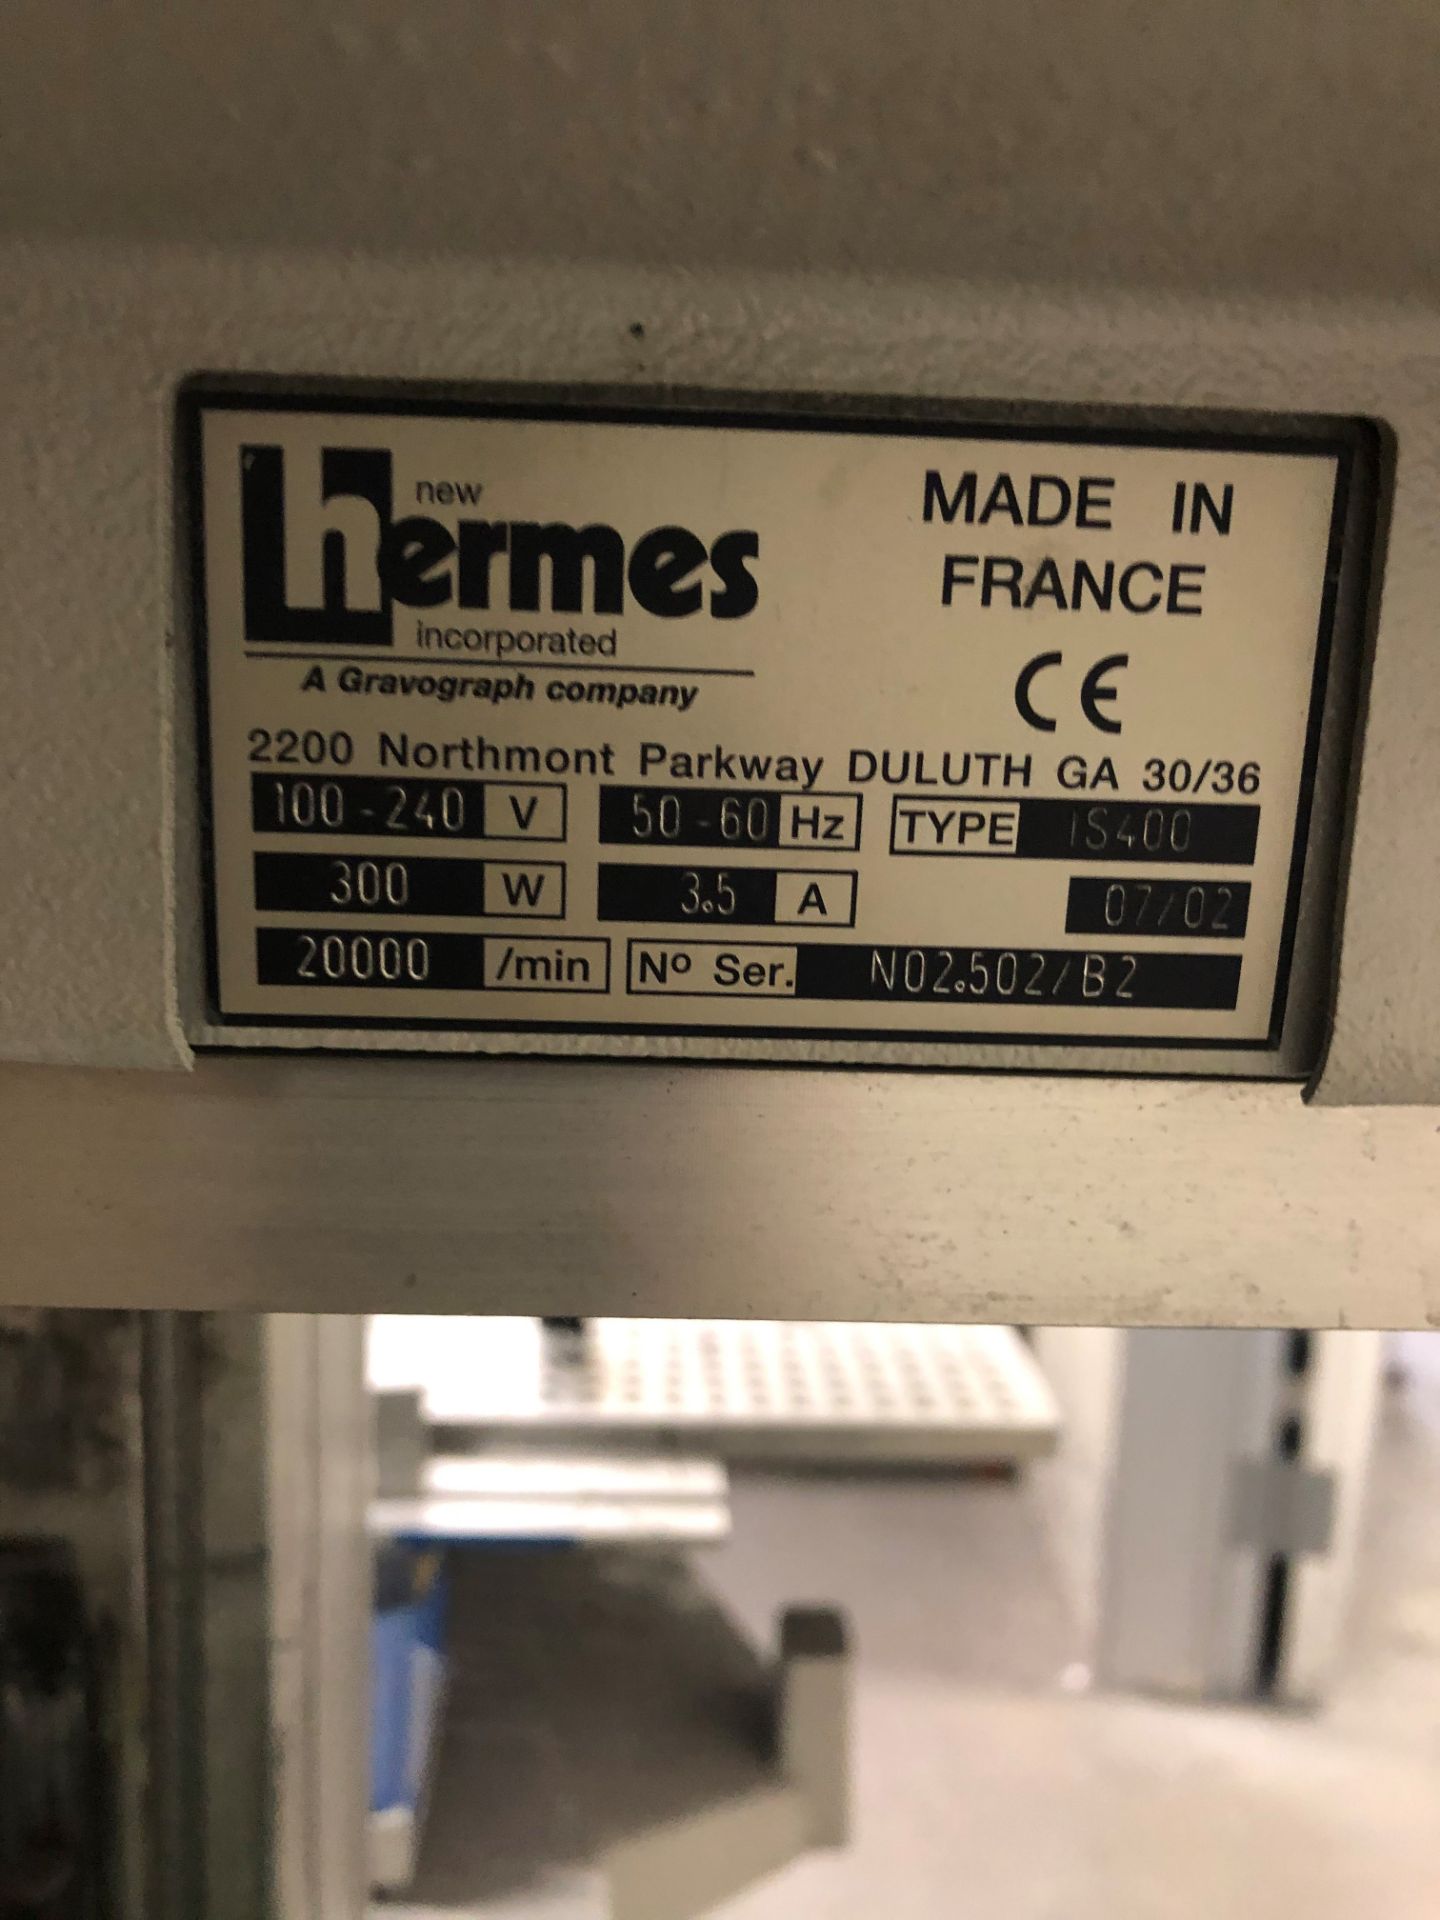 New Hermes IS400 CNC Engraver, s/n 2.502/B2, New 2002 - Image 9 of 9